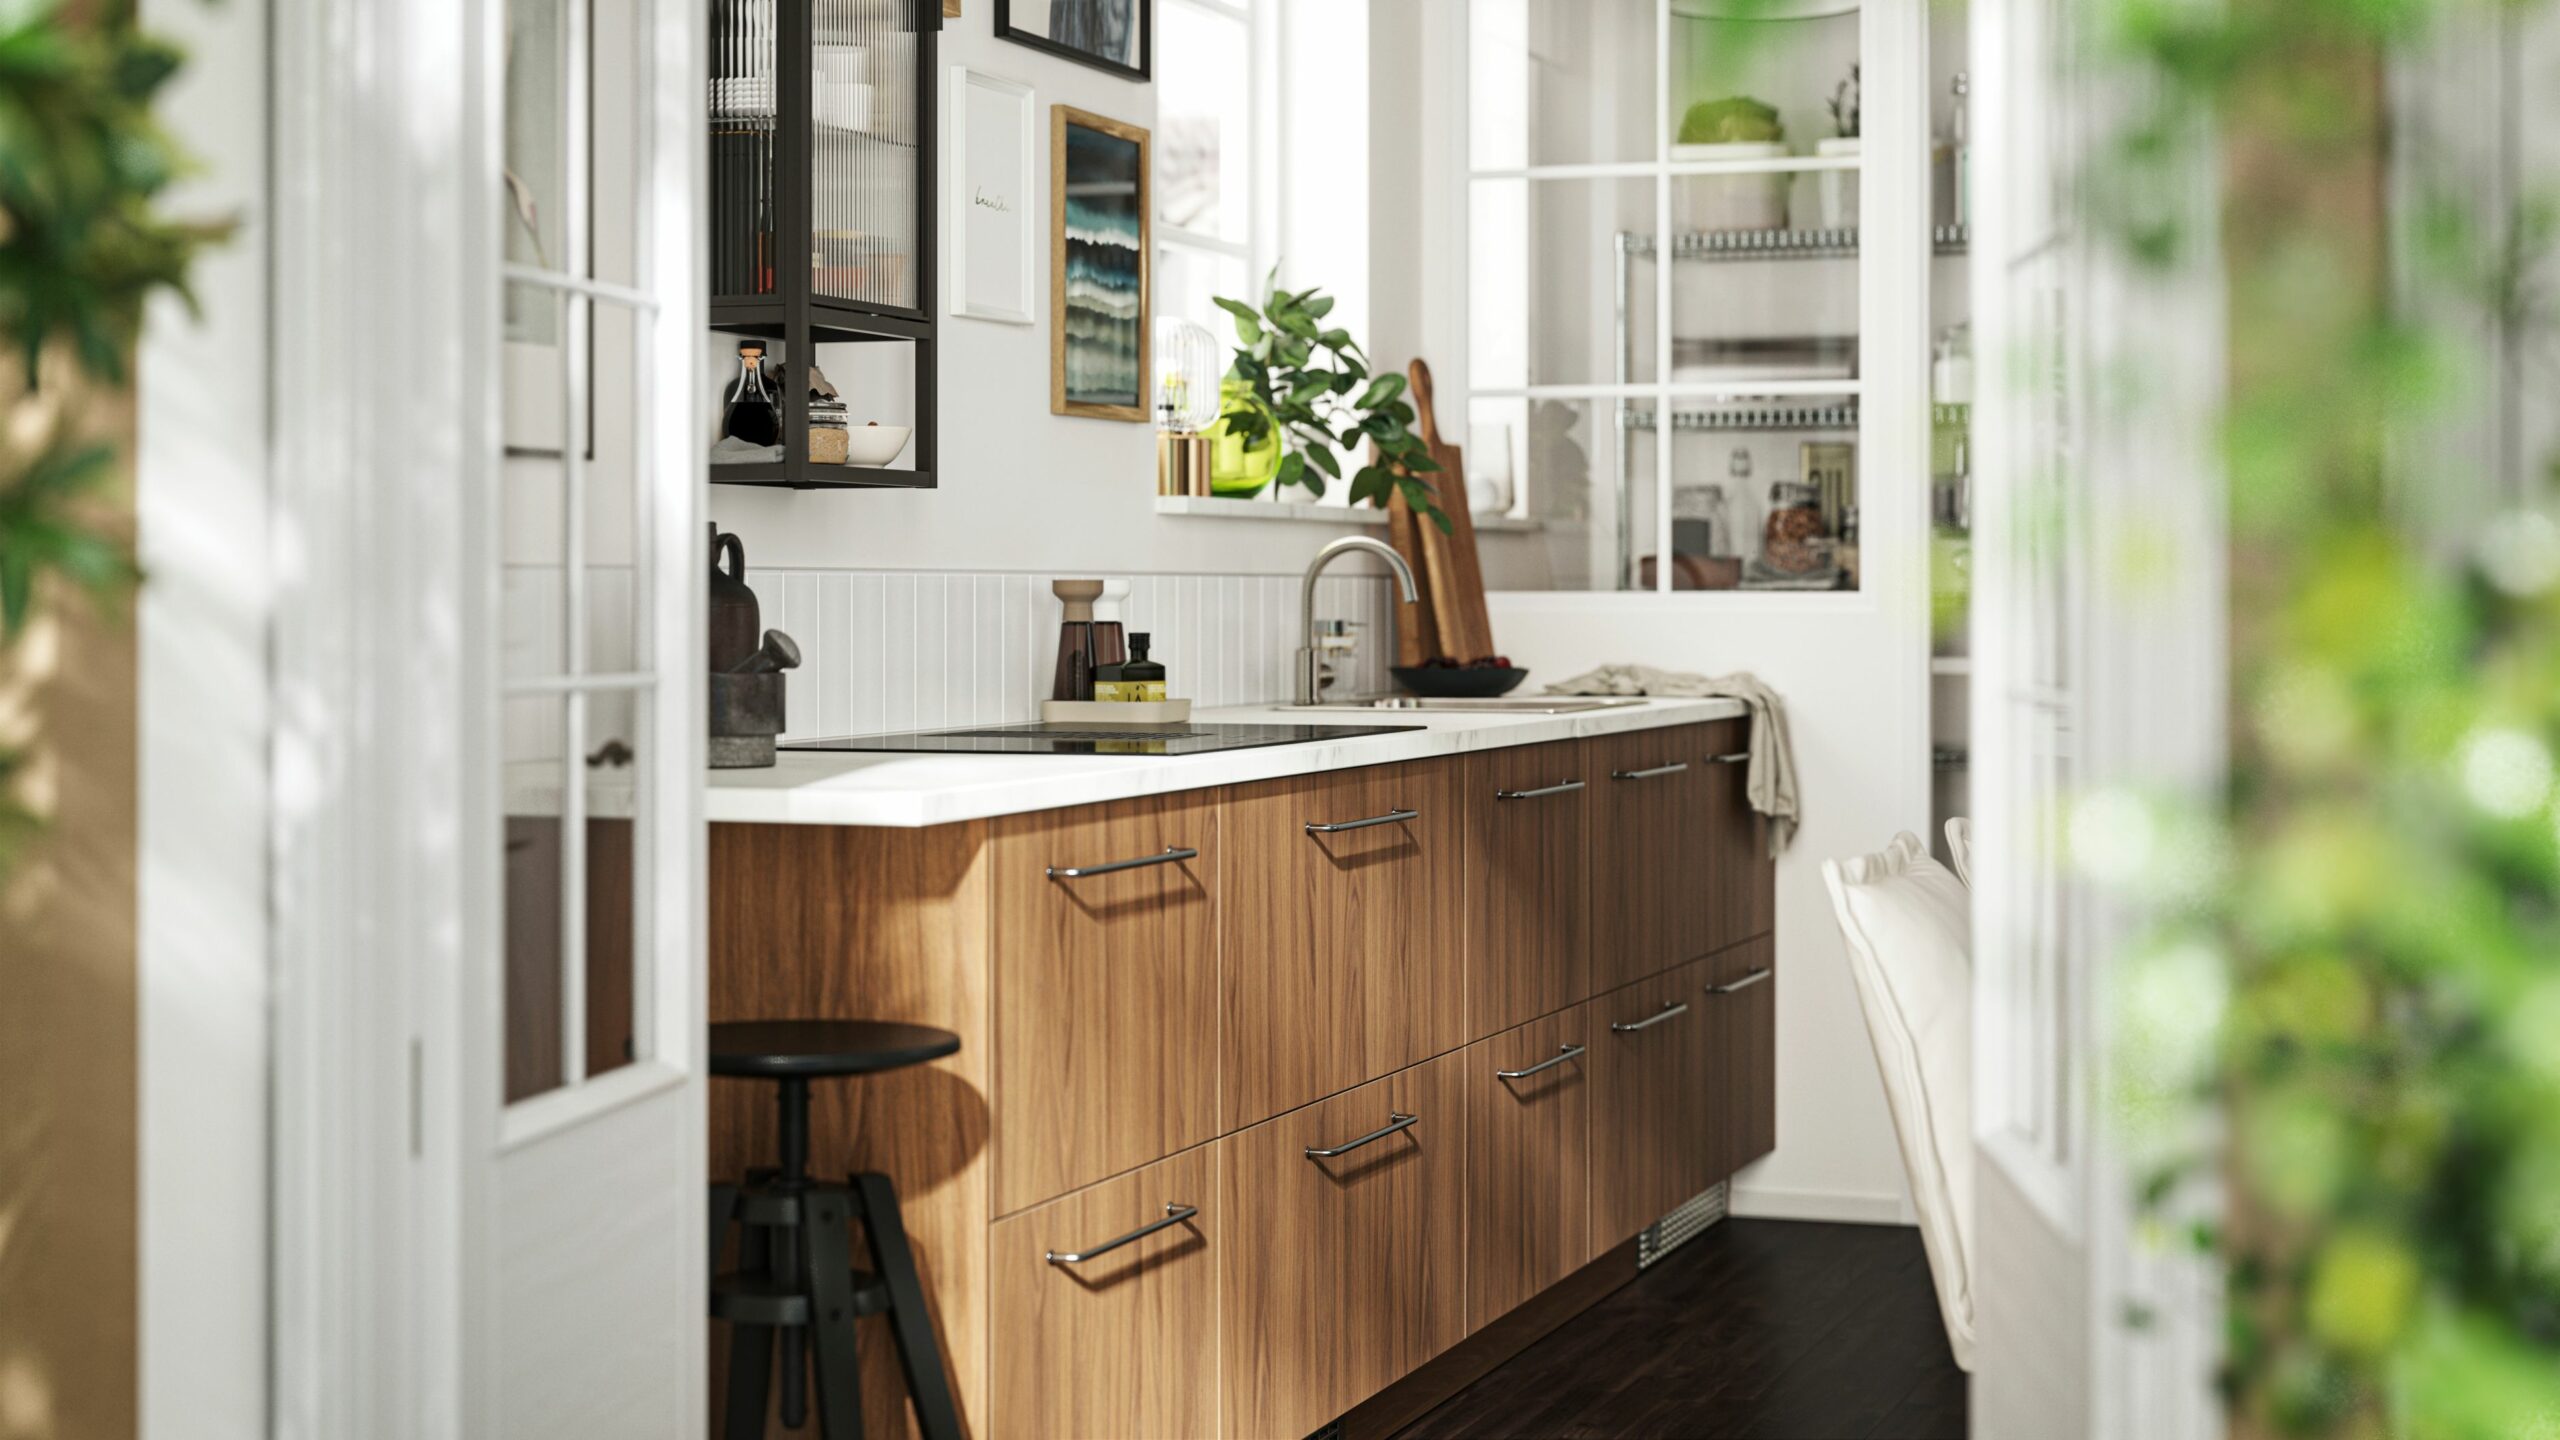 A gallery of kitchen inspiration - IKEA CA